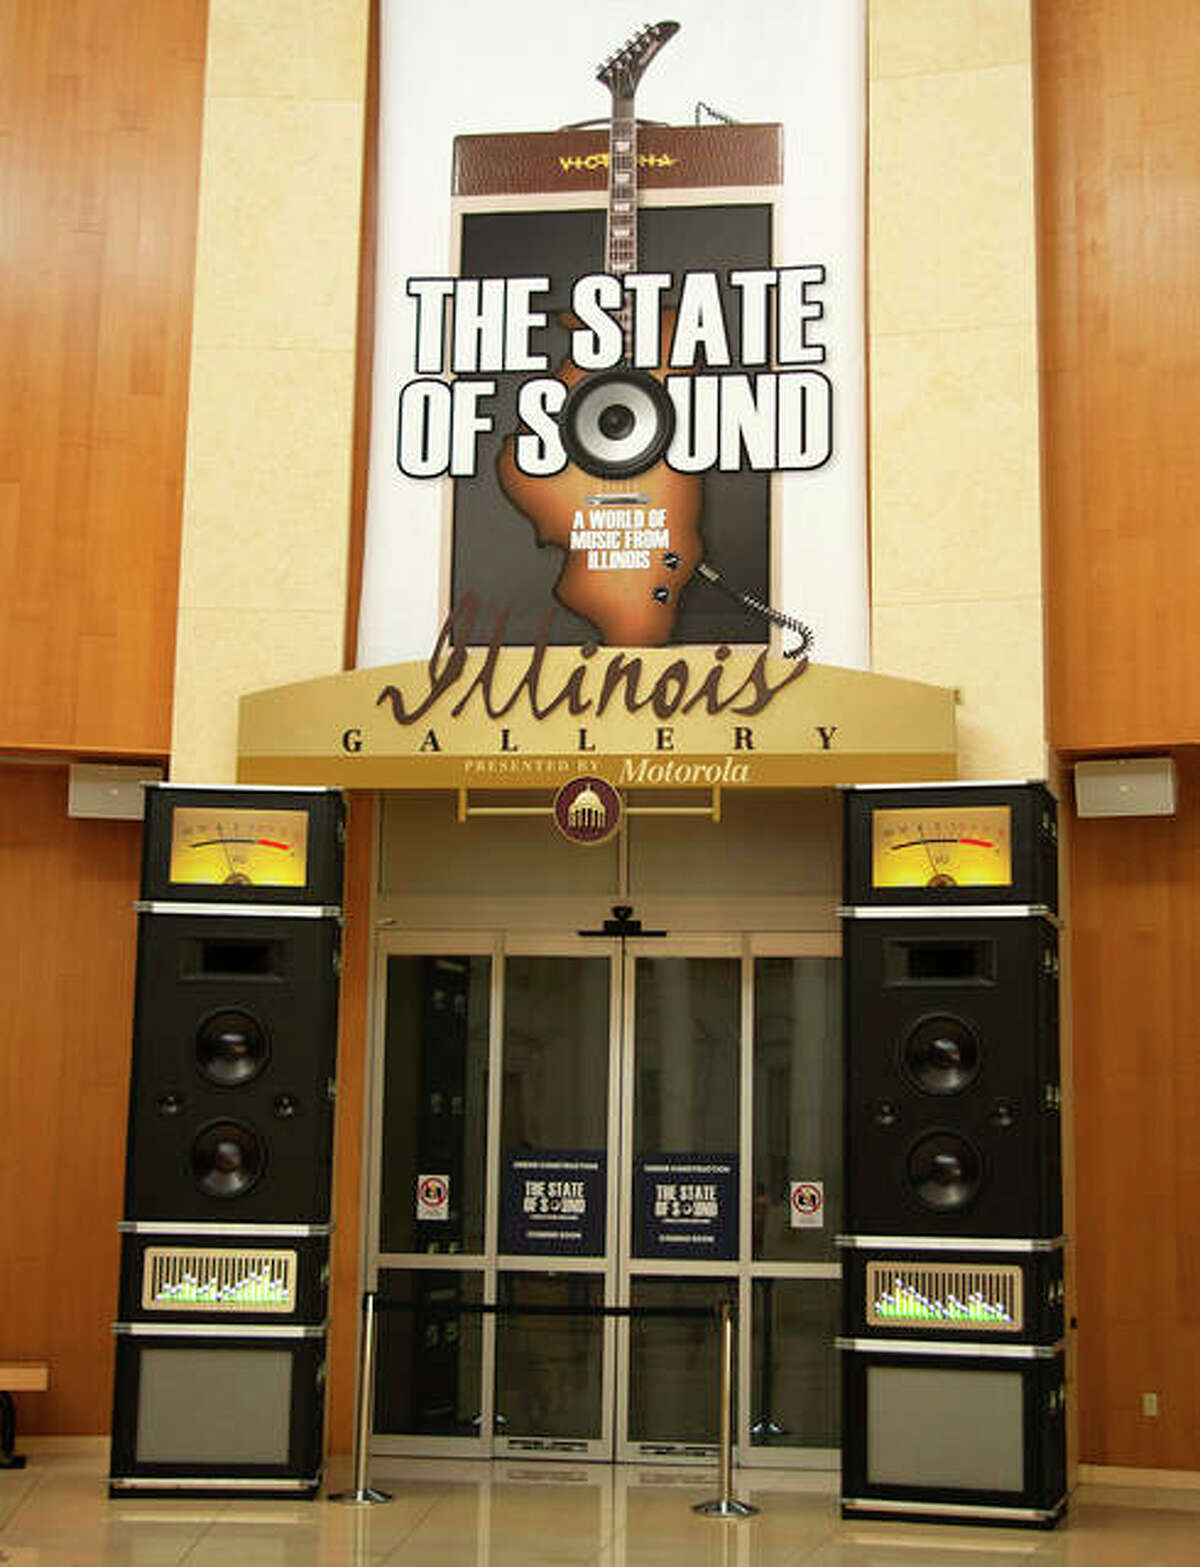 The “State of Sound: A World of Music from Illinois” exhibit will run through Jan. 23, 2022, at the Abraham Lincoln Presidential Library and Museum in Springfield.